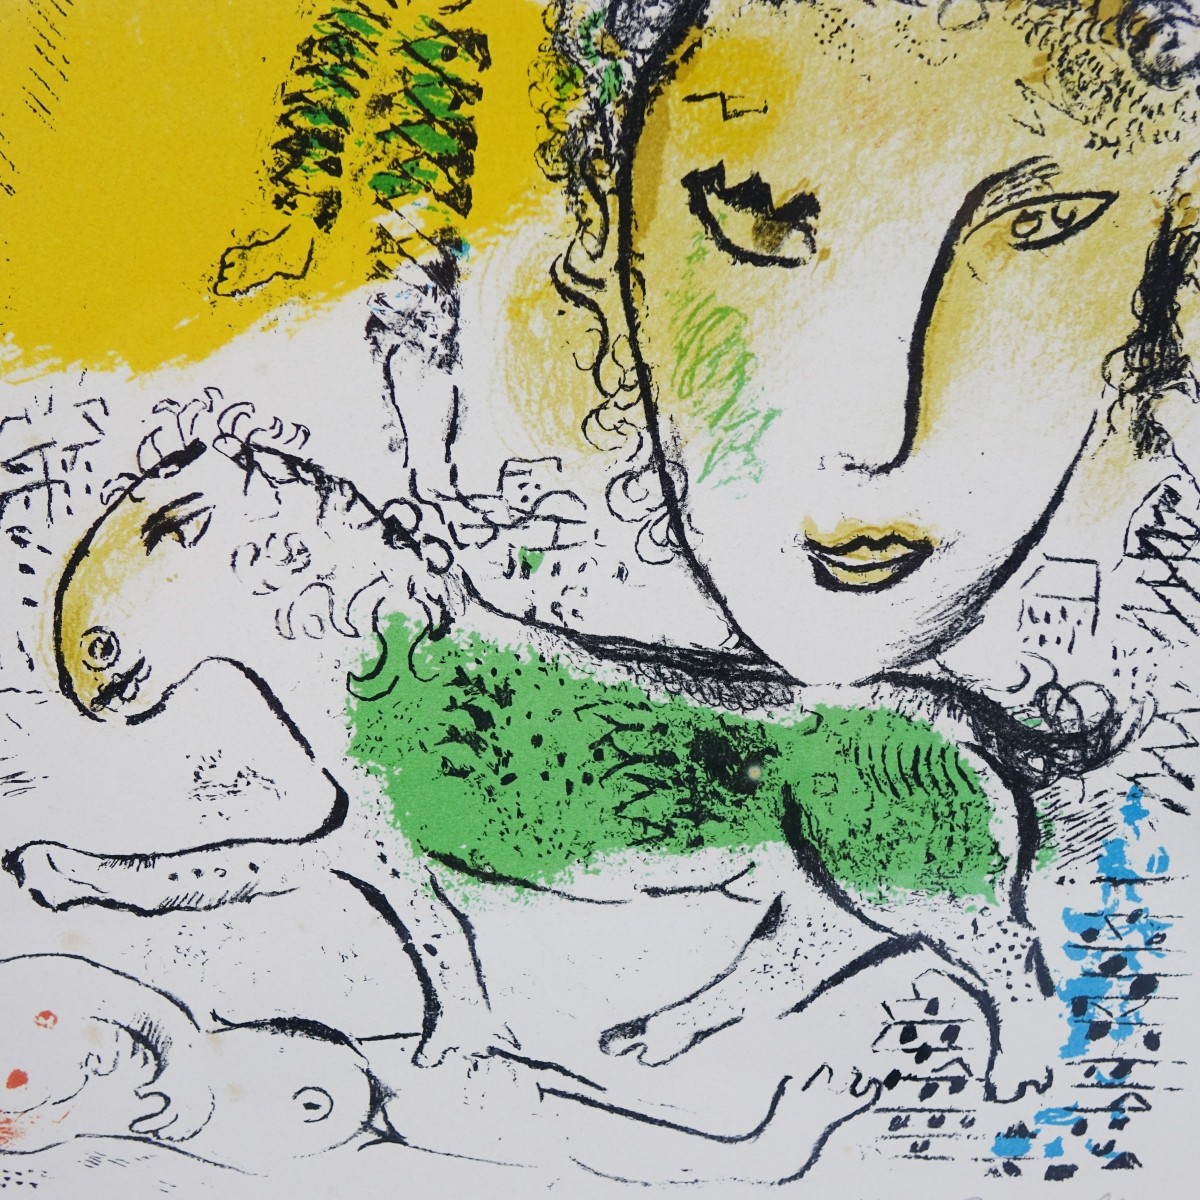 Marc Chagall, Russian/French (1887 - 1985)